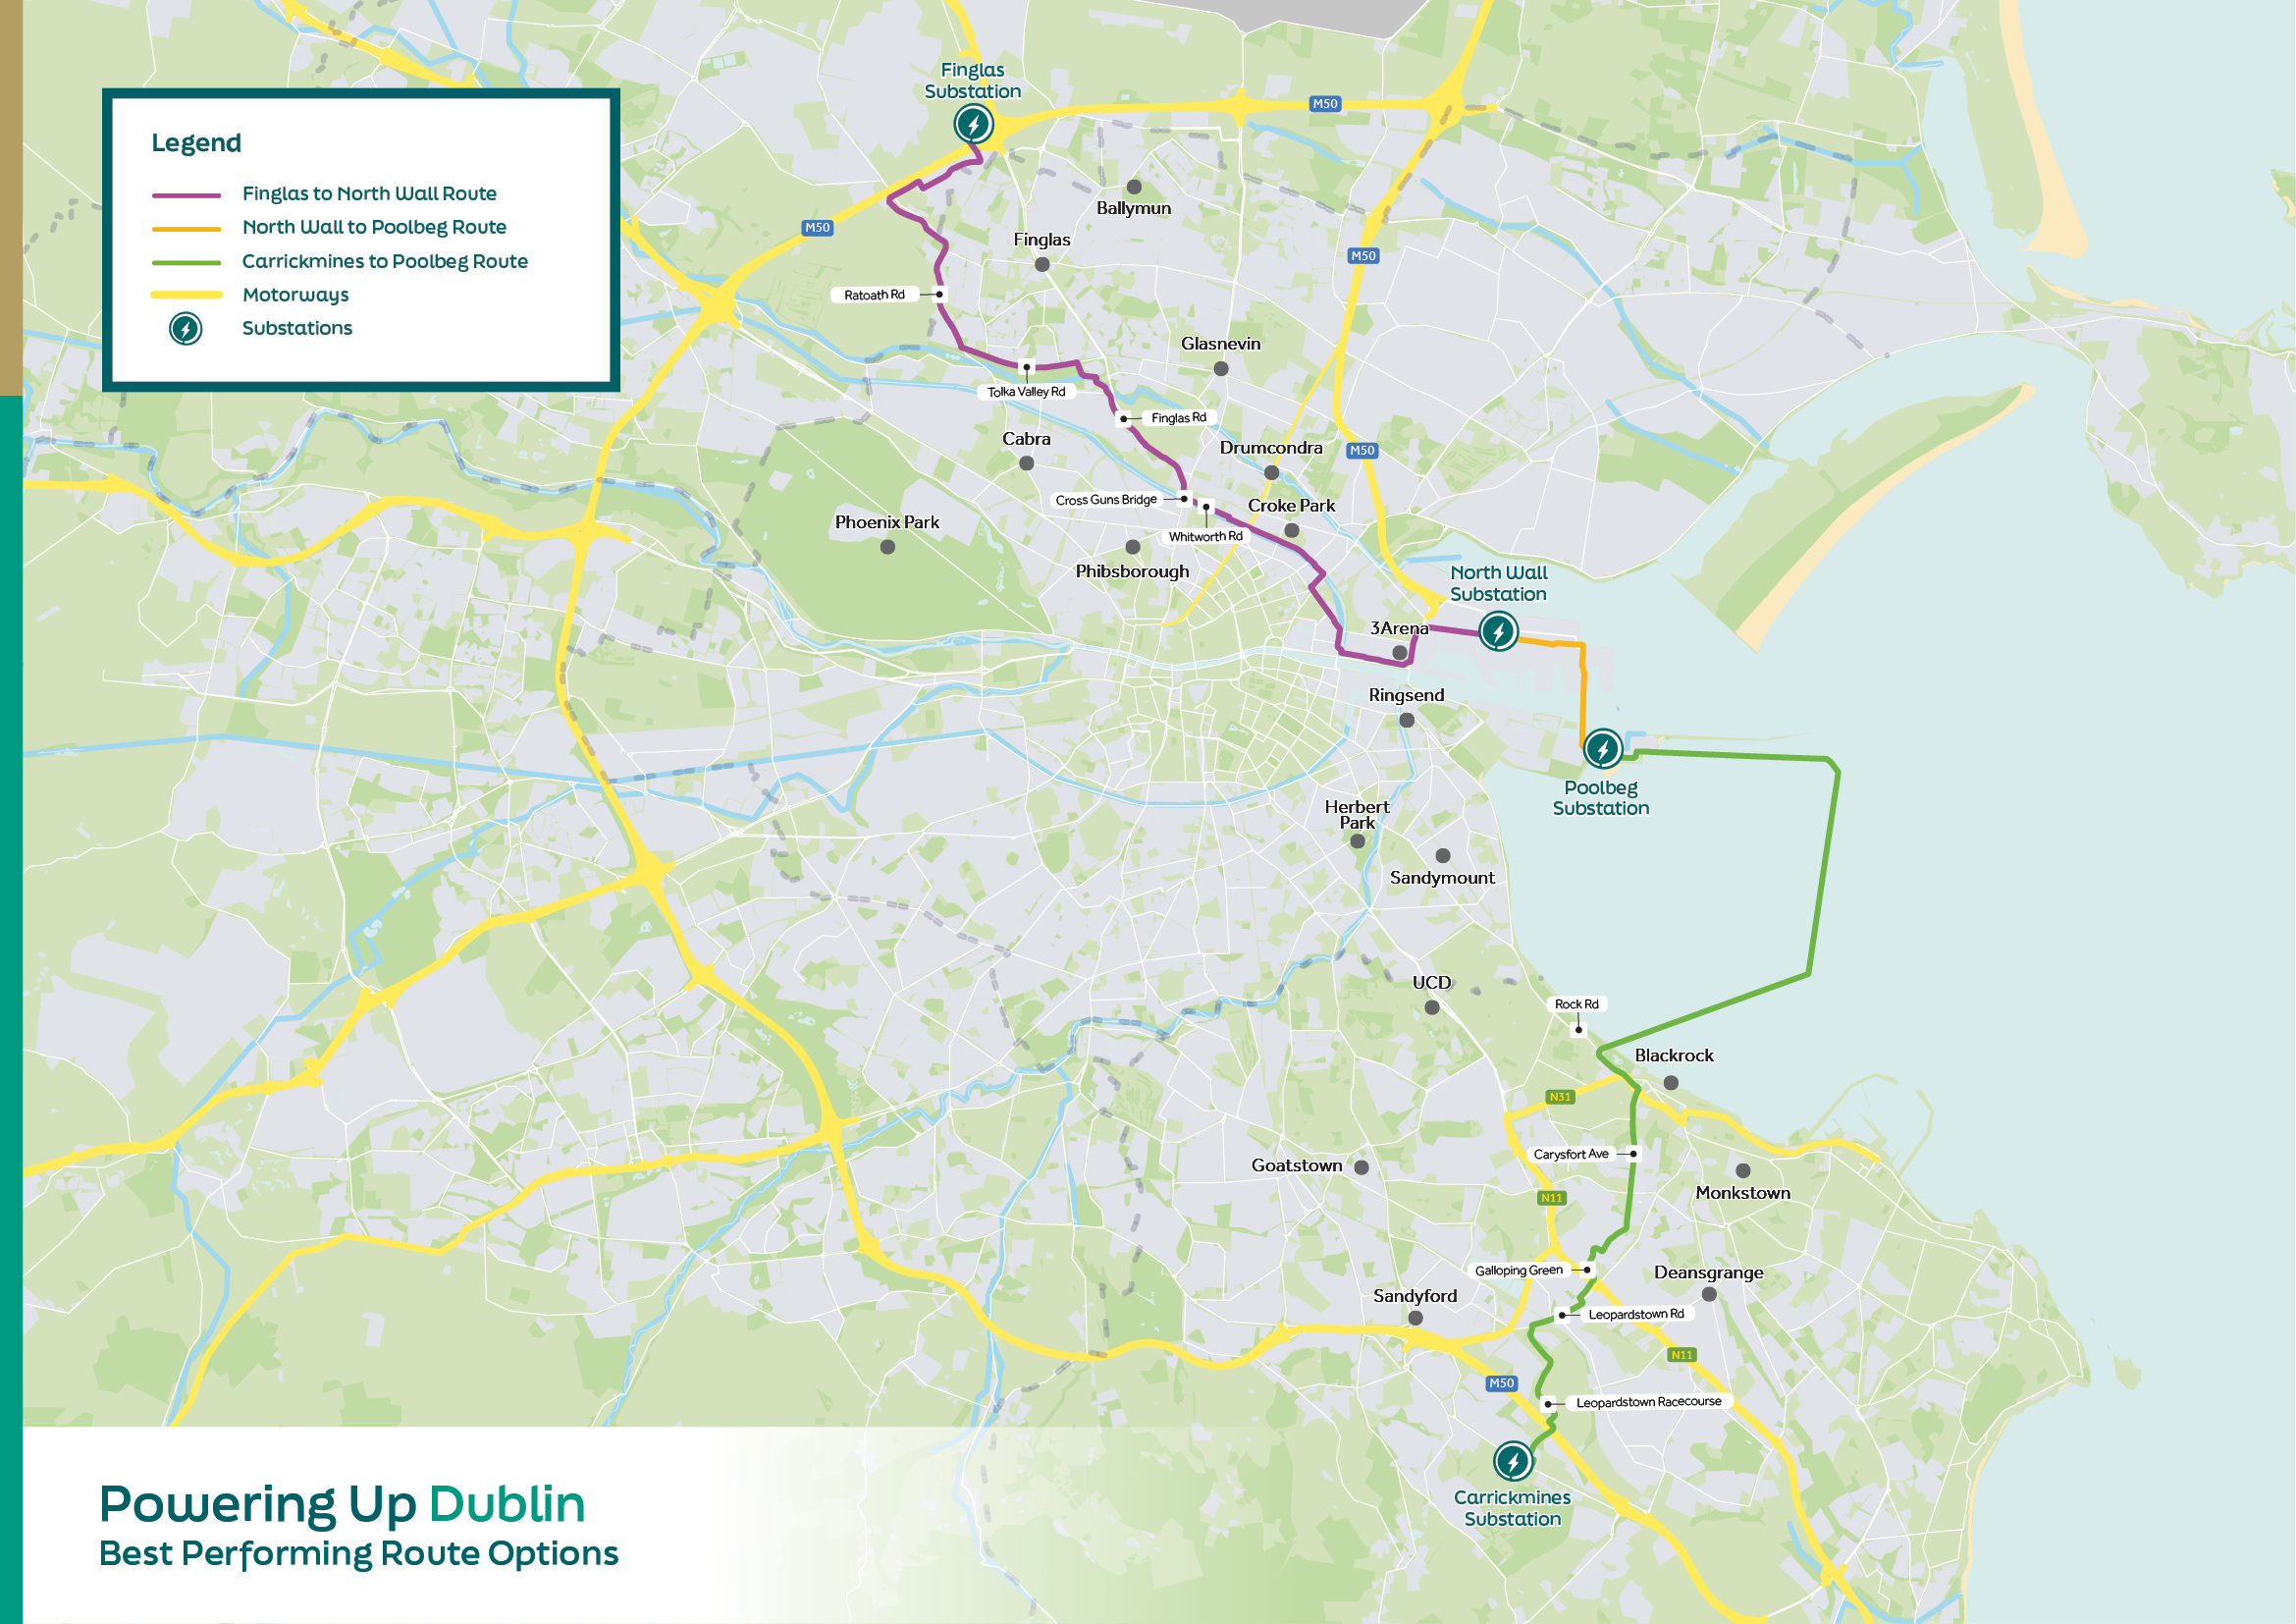 A map showing the Powering Up Dublin BPOs